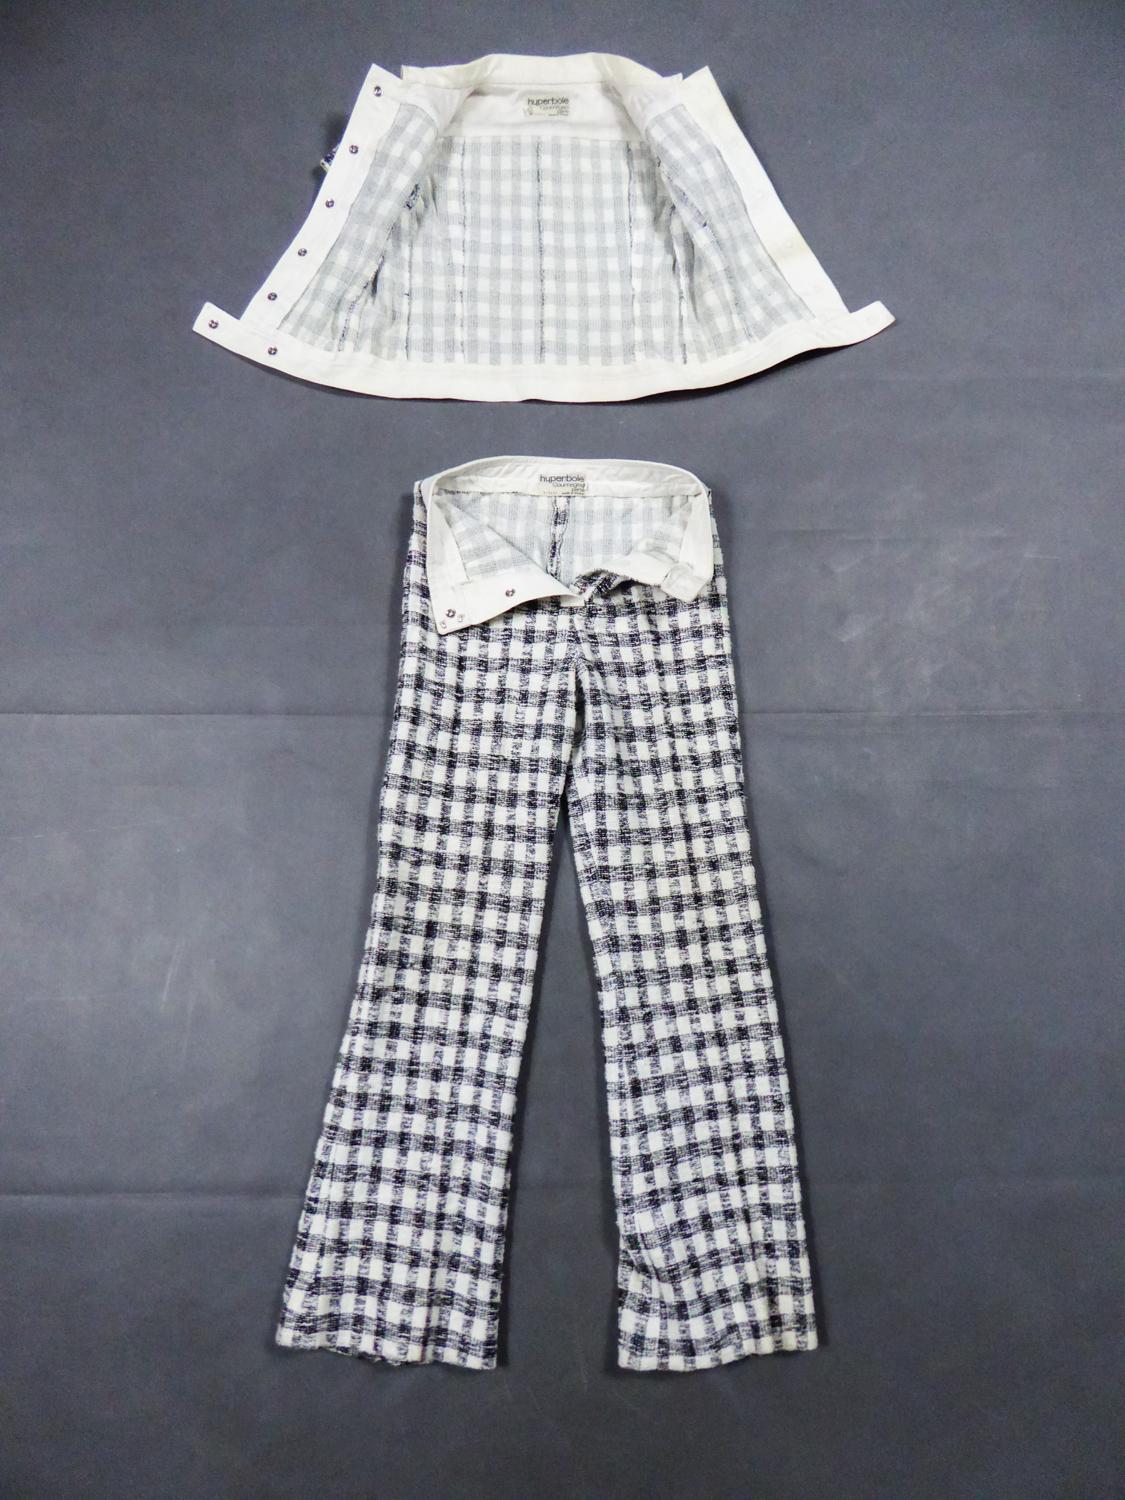 Circa 1969
France Haute Couture

A pant suit by André Courrèges Hyperbole Size O from the late 1960s. Wool knitting and stretch cotton with bouclé woven with black checked on a white background, reminiscent of Vichy motifs or inspired by the